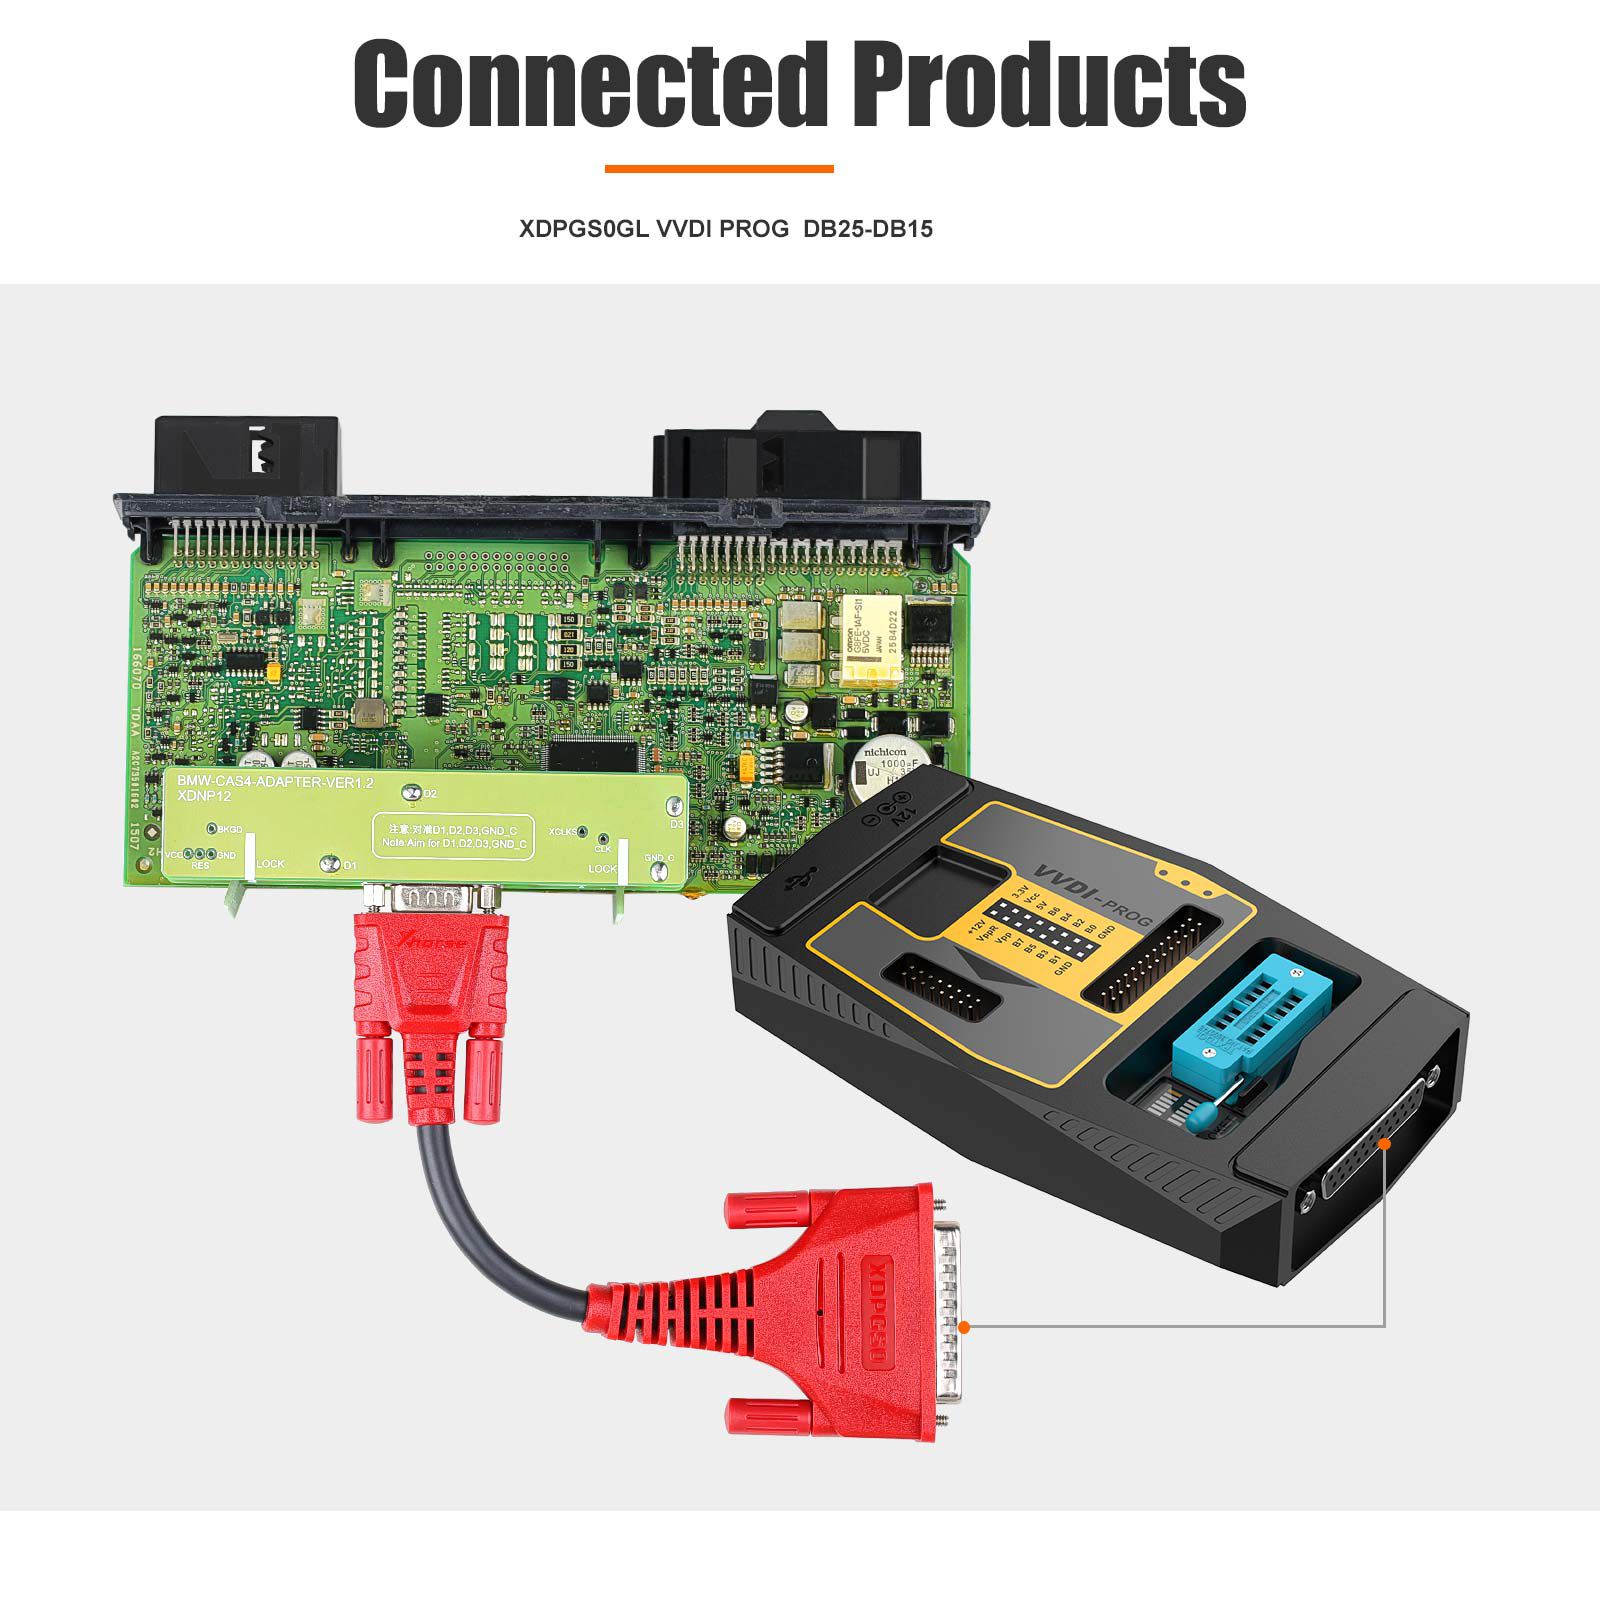 Xhorse VVDI Prog Programmer and XDPGSOGL DB25 DB15 Conector Work with Solder Free Adapter